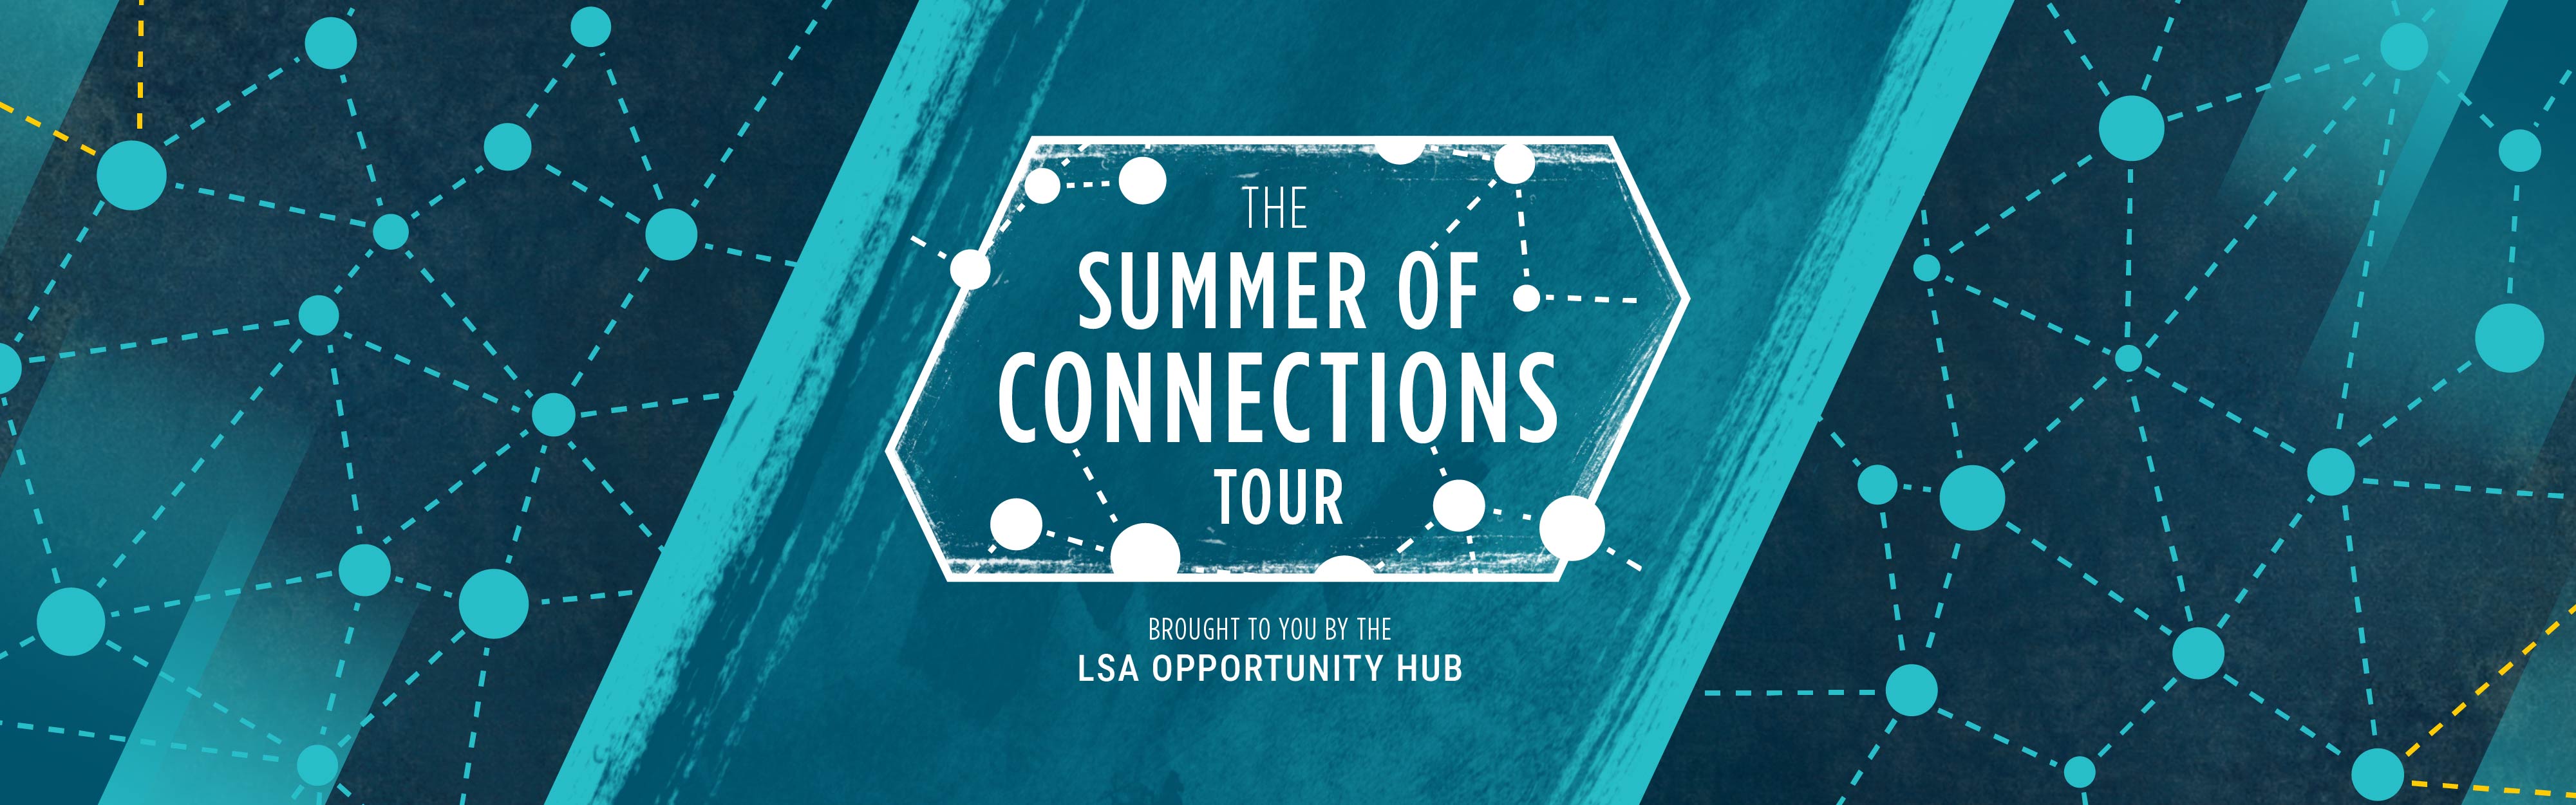 The Summer of Connections Tour brought to you by the LSA Opportunity Hub